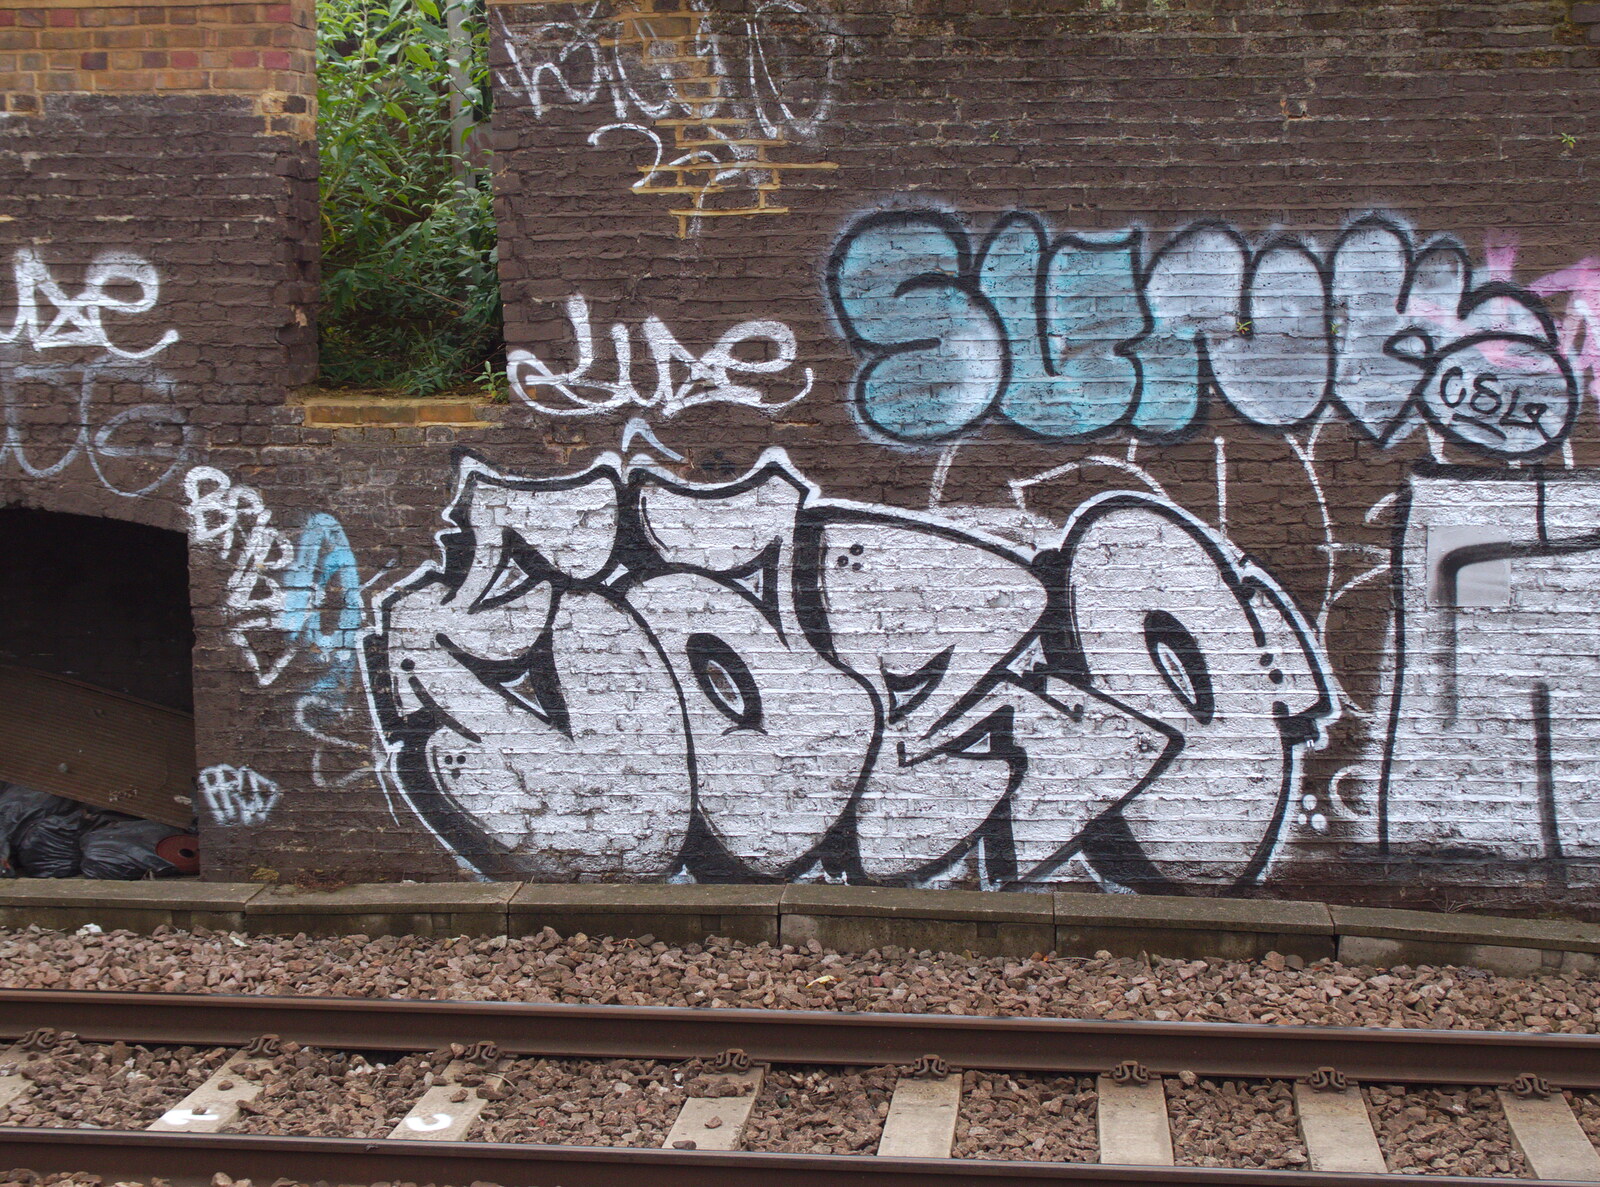 More graffiti tags from A High-Pressure Watermain and some Graffiti, Eye and London - 11th June 2019